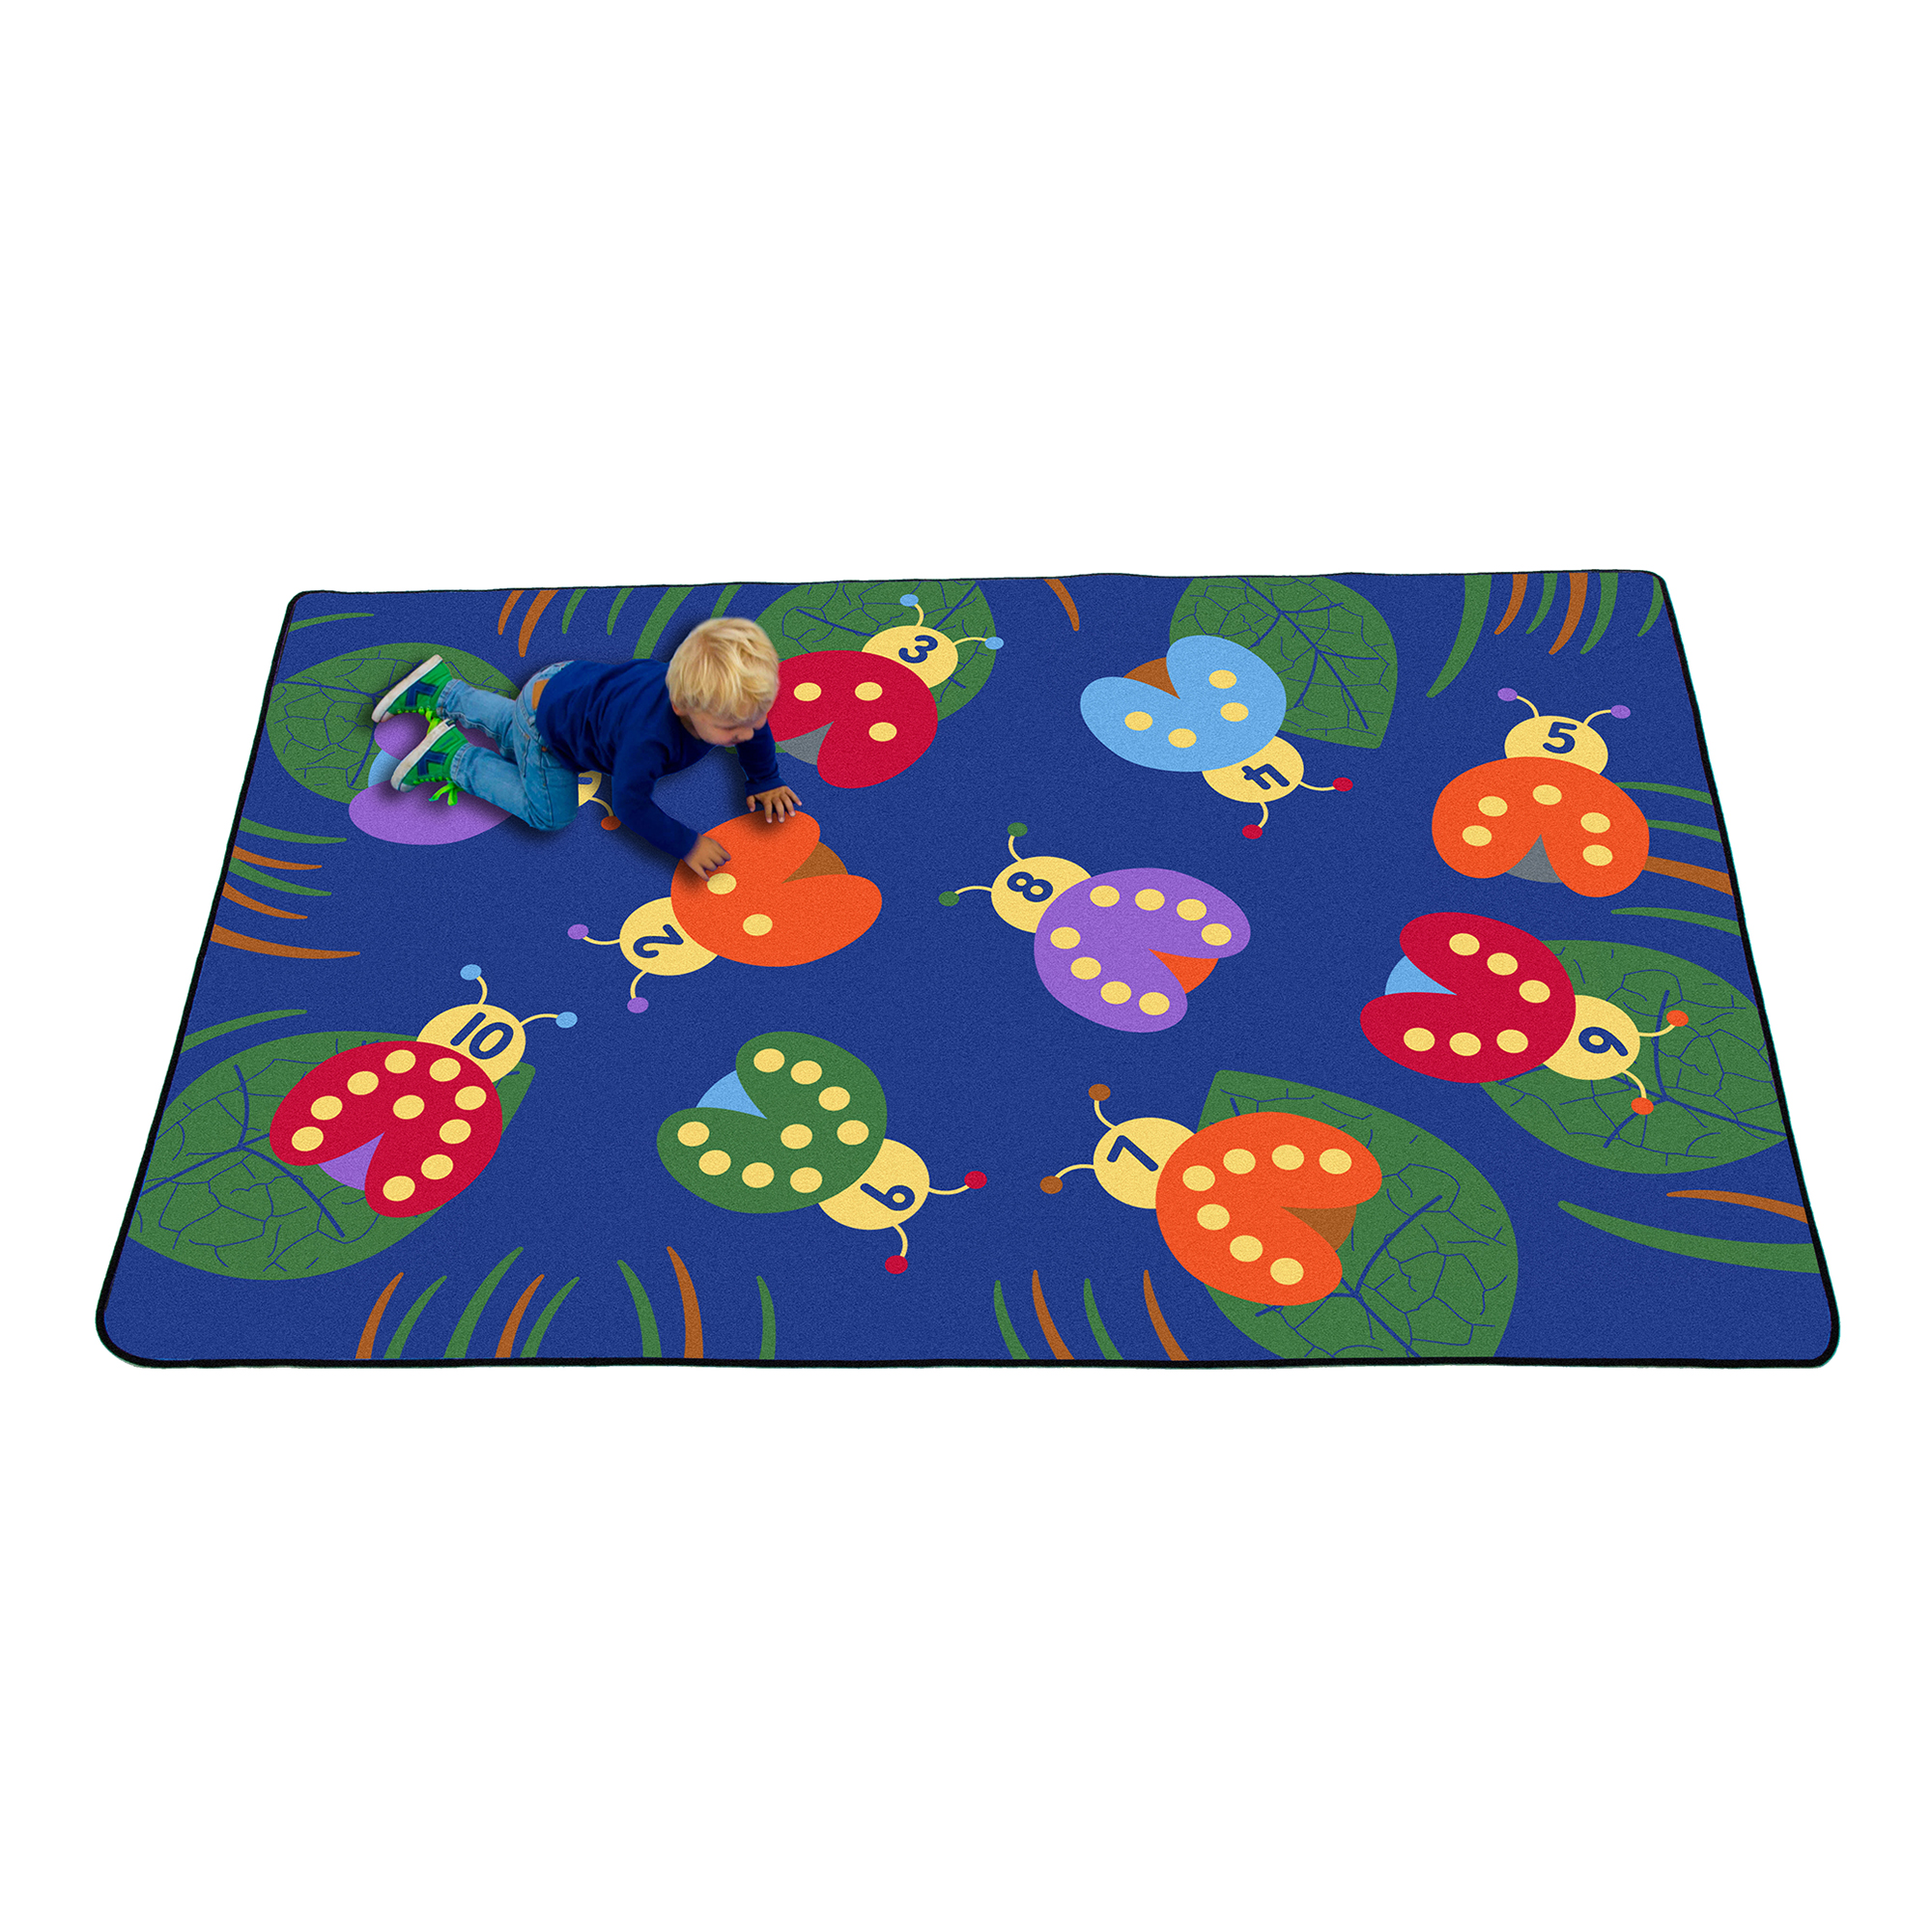 Counting with Lady Bugs Rug ‐ Rectangle Large